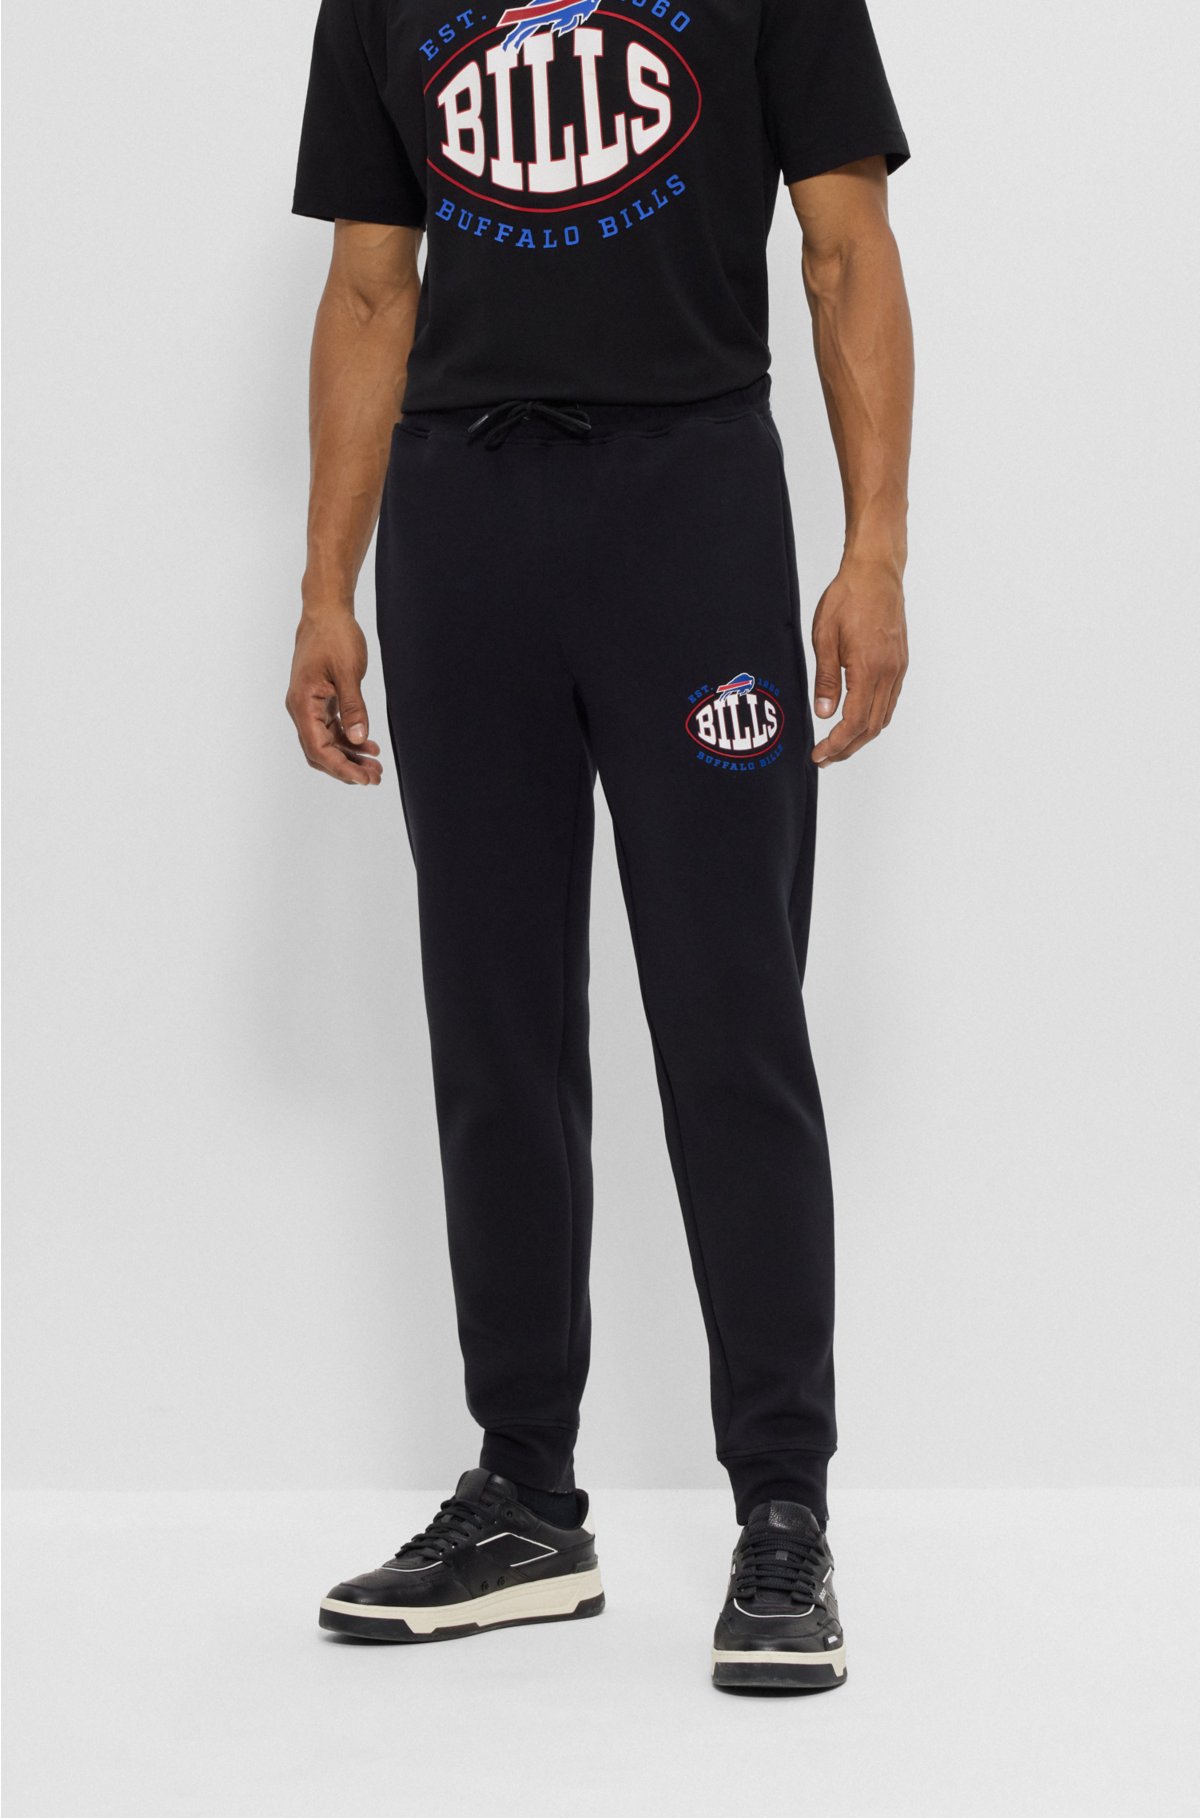 BOSS x NFL cotton-blend tracksuit bottoms with collaborative branding